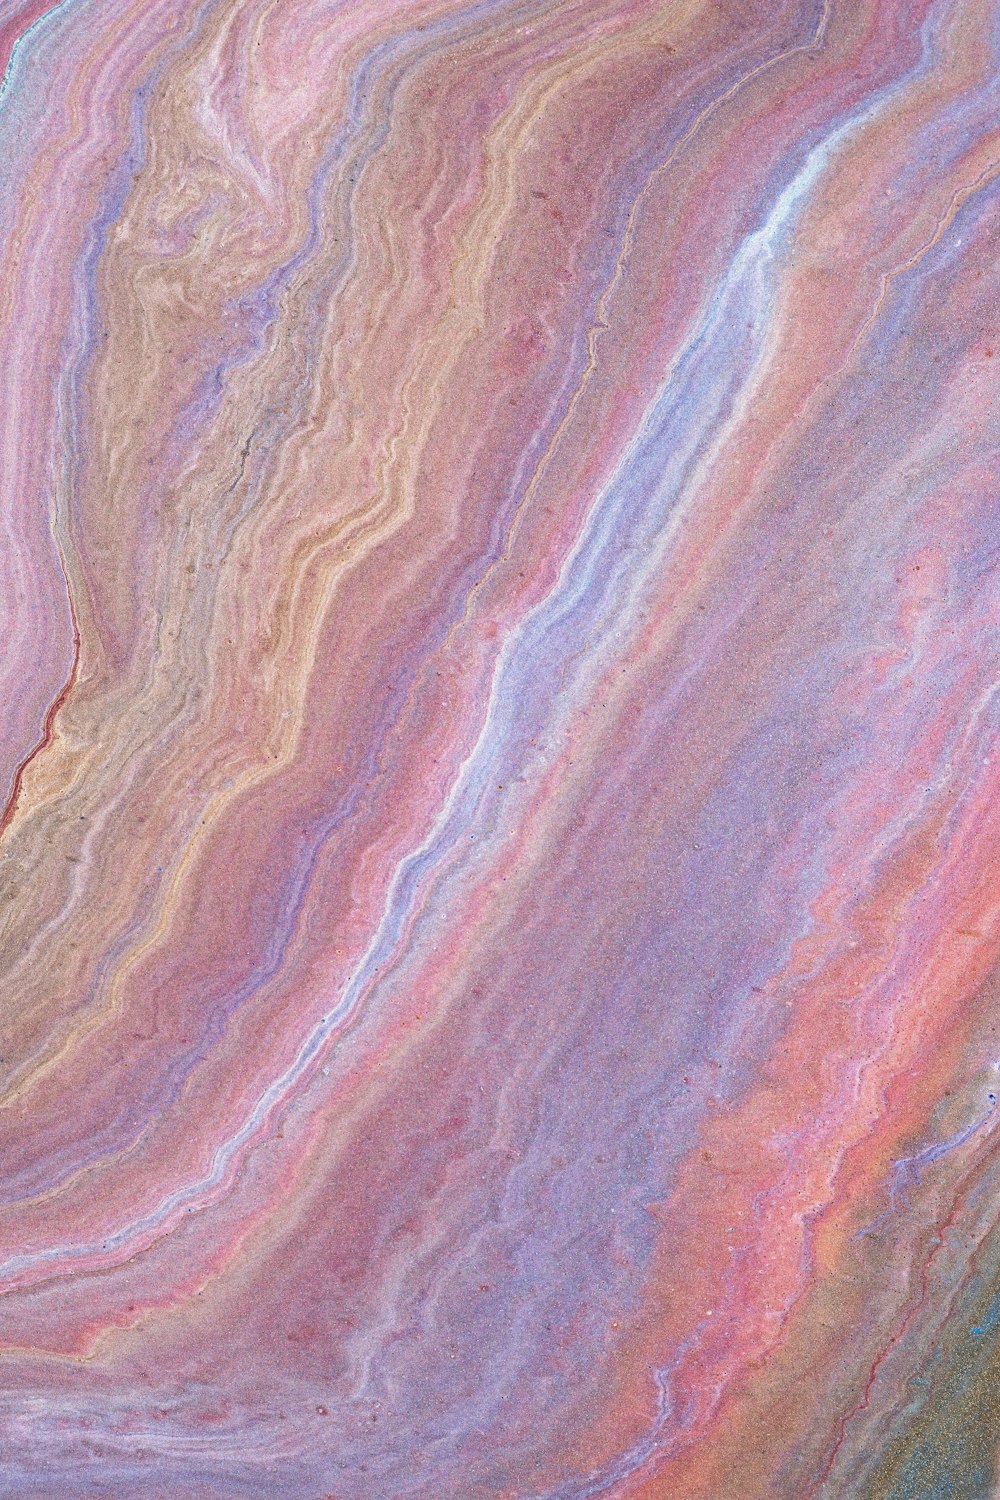 a very colorful marbled surface that looks like it has been painted